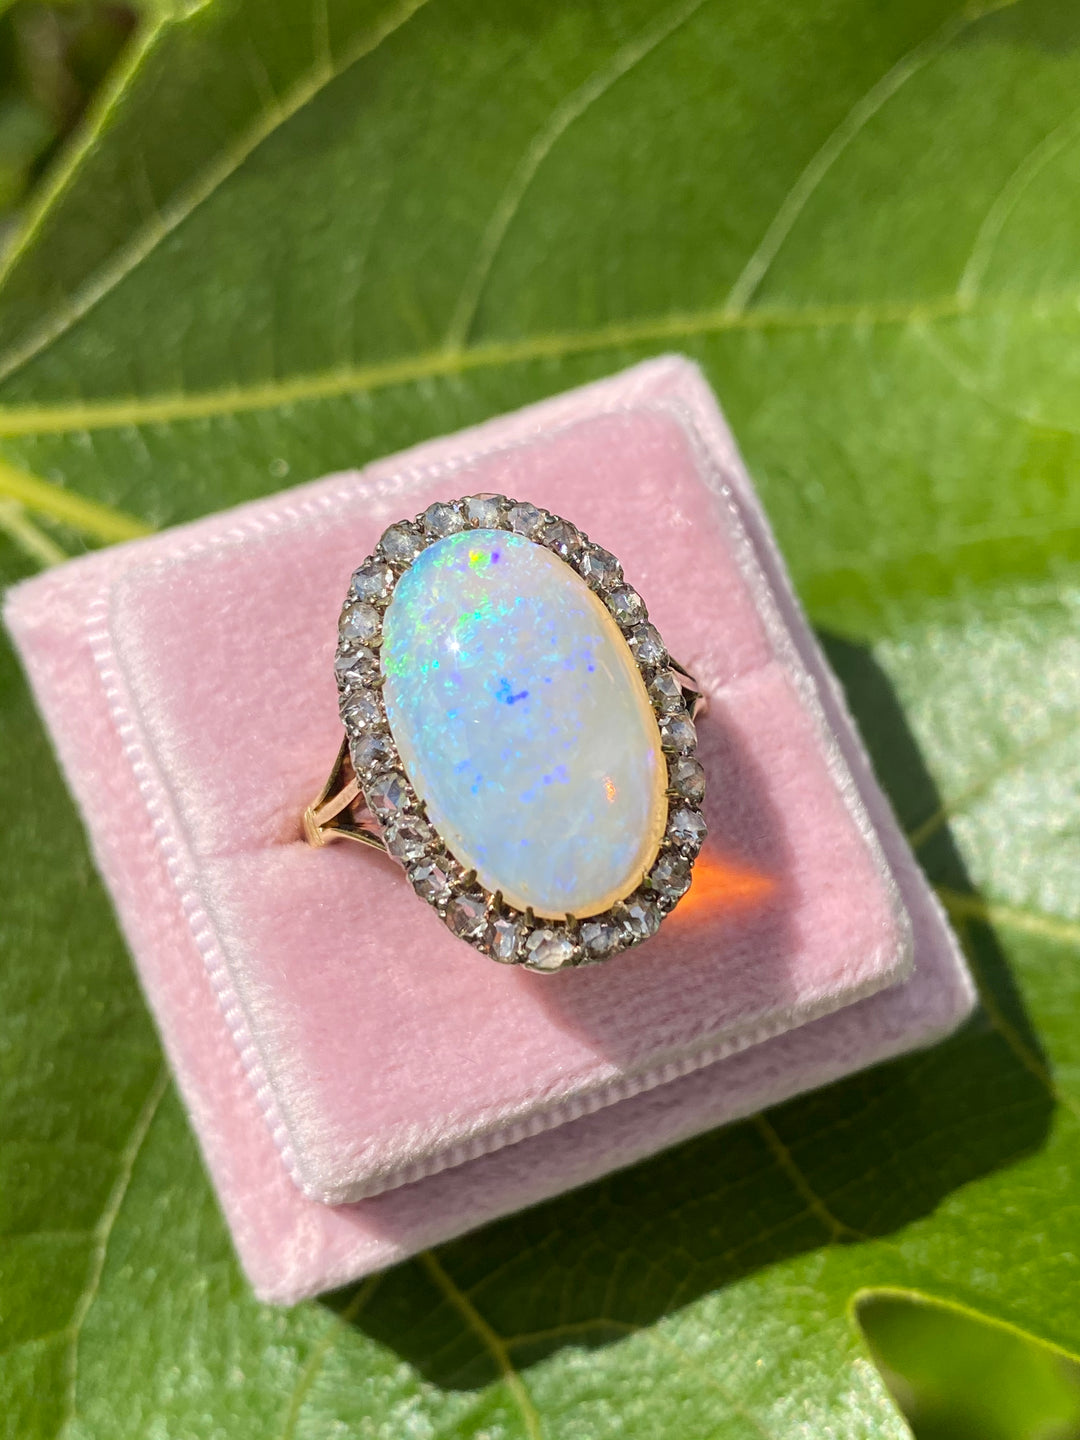 6.00 Carat Antique Victorian White Opal and Diamond Halo Ring in 18ct Gold